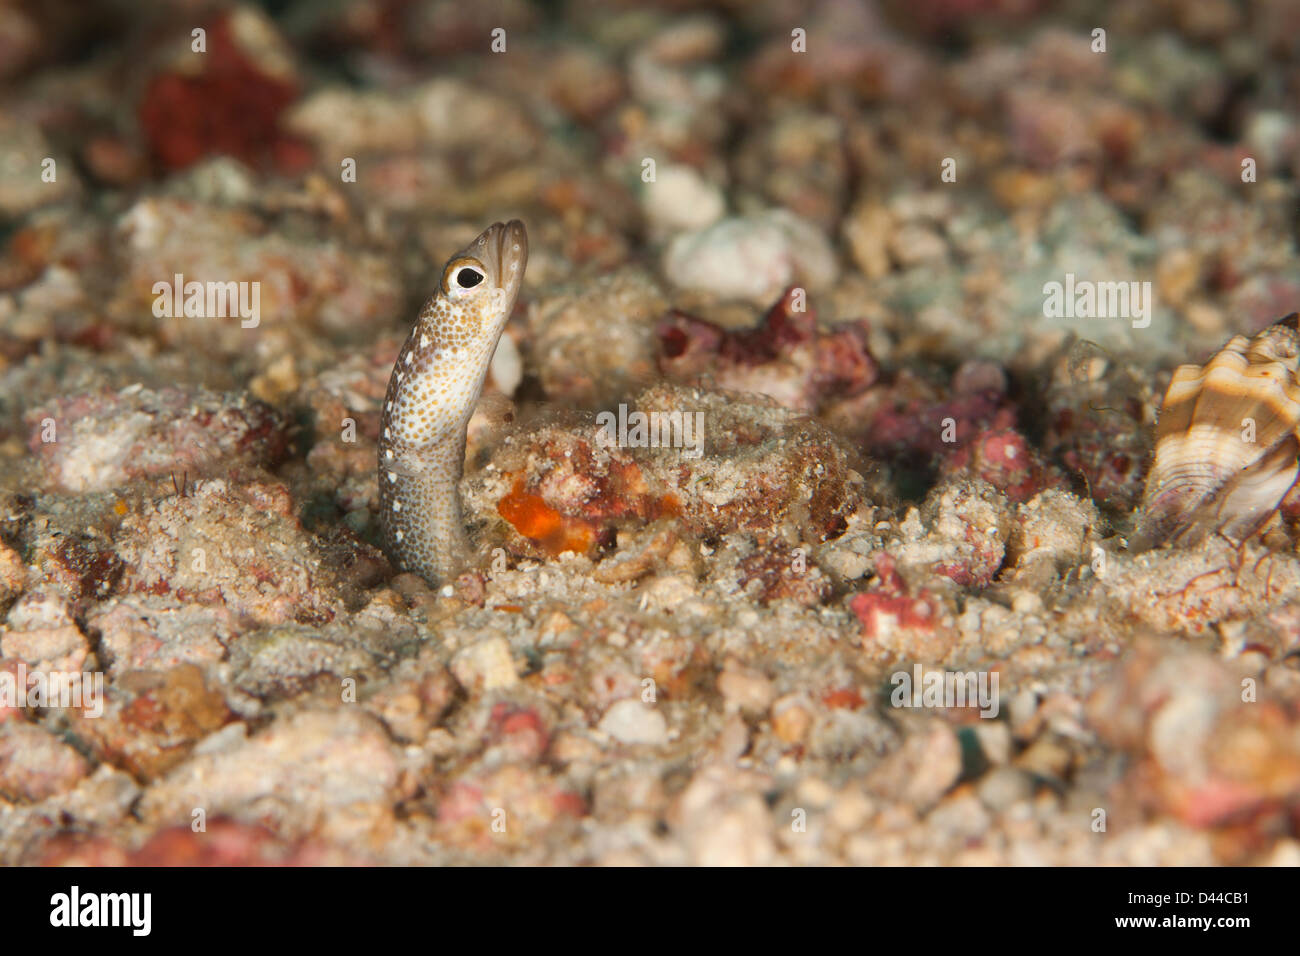 Spaghetti Garden Eel (Gorgasia maculata), peering out of the coral rubble on a tropical coral reef in Bali, Indonesia. Stock Photo